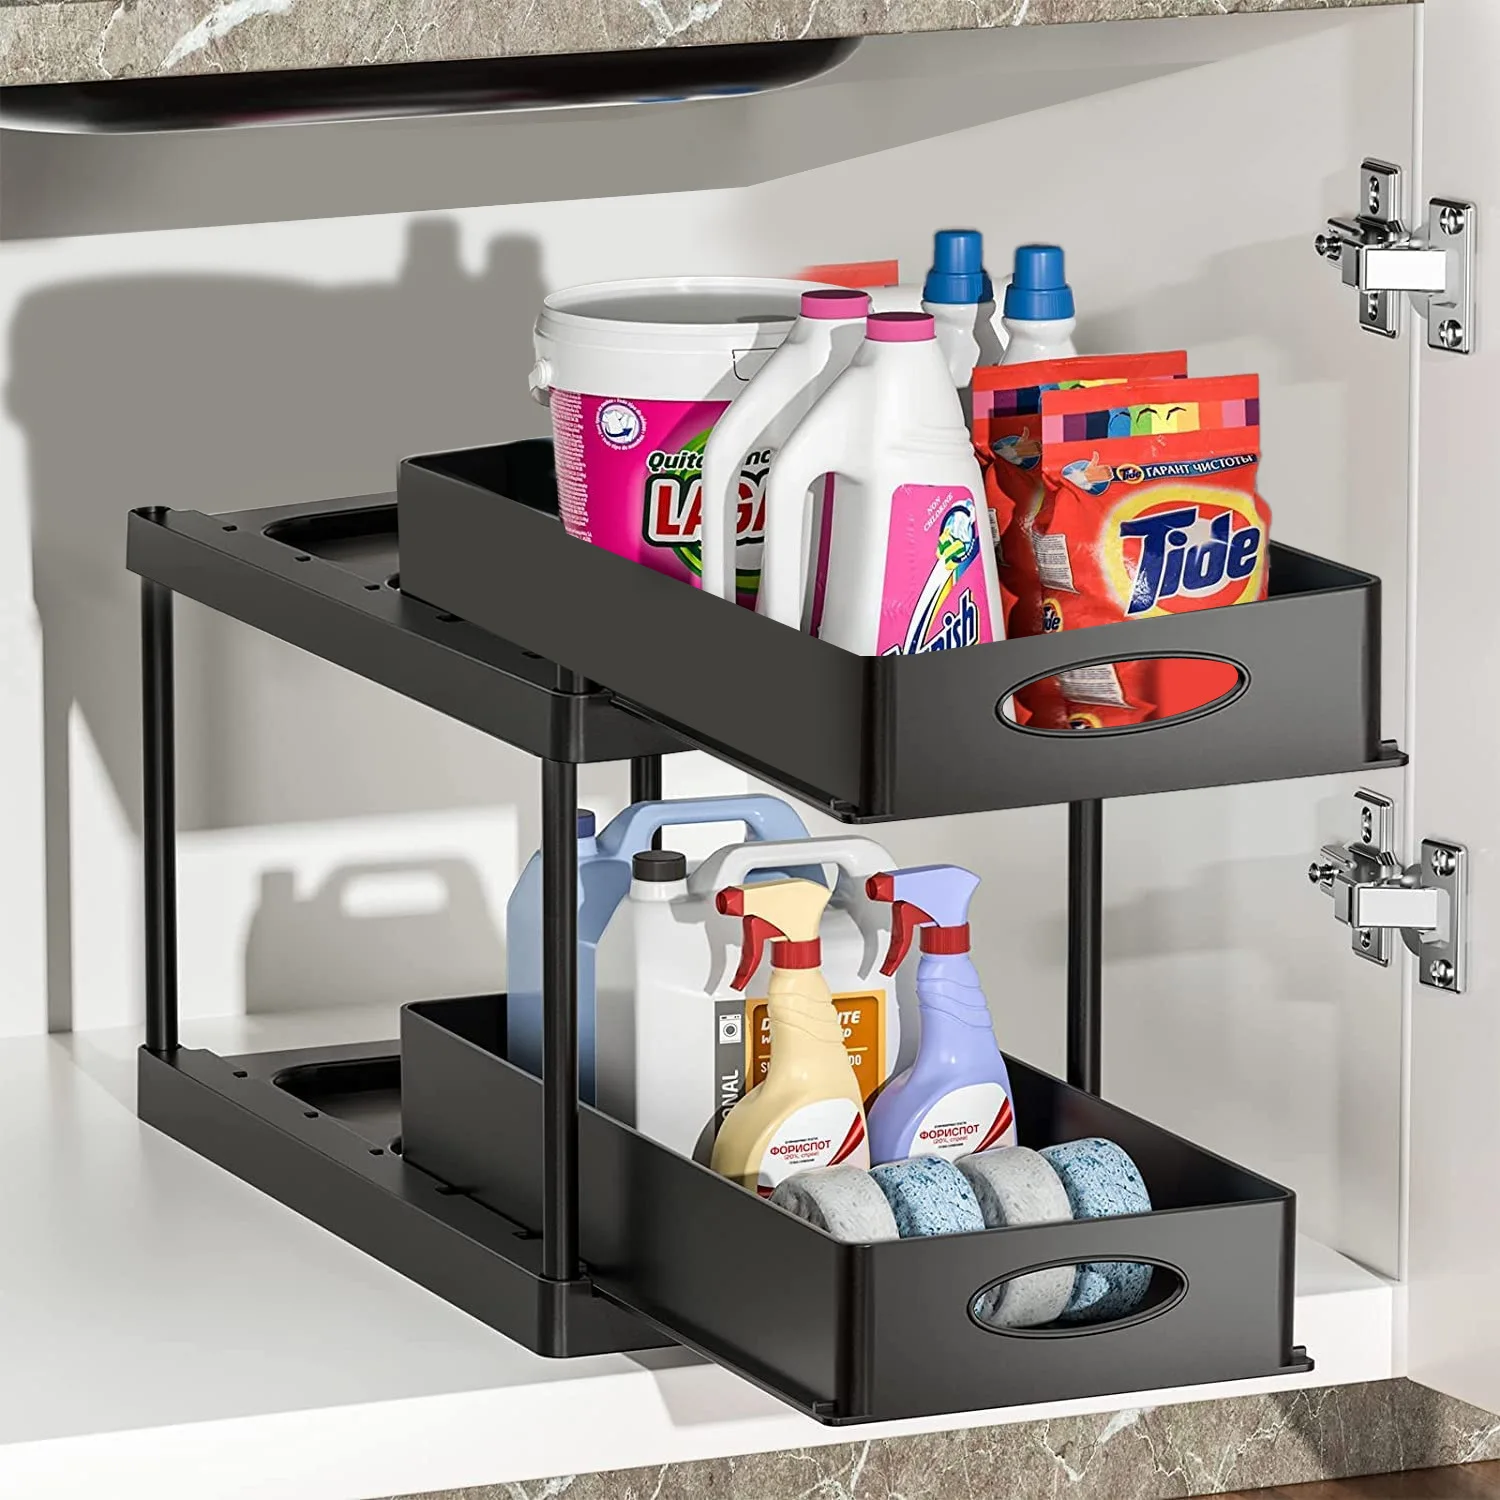 

Kitchen Under Sink Storage Rack 2 Tier Sliding Cabinet Basket Countertop Pull Out Organizer Holder Drawer Spice Shelf, As picture or customized